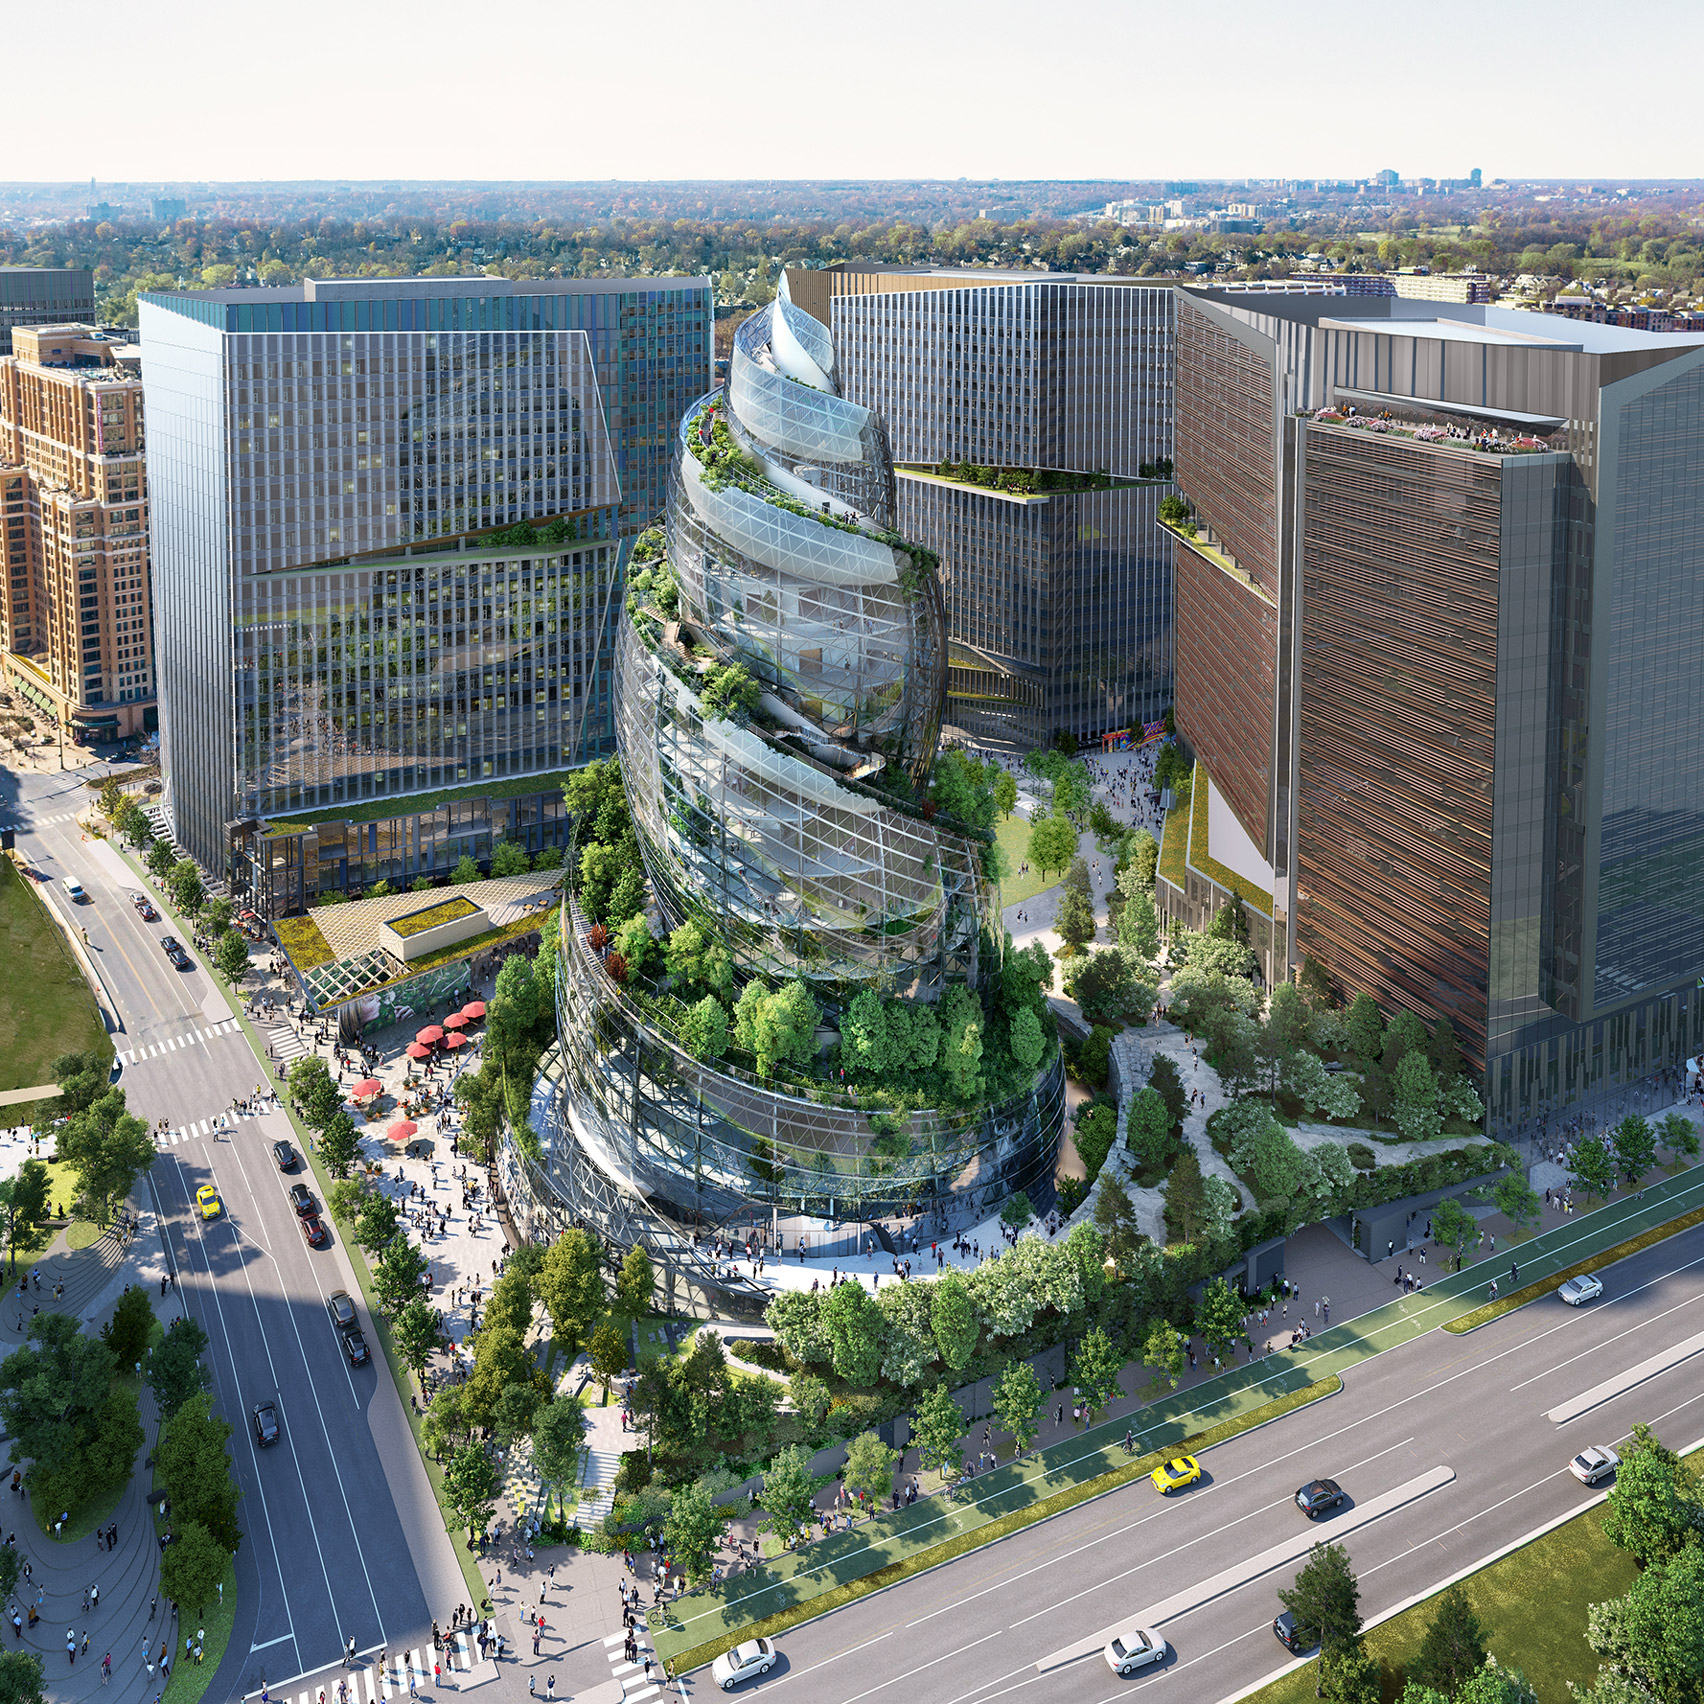 HQ2 by NBBJ will include outdoor hiking trail